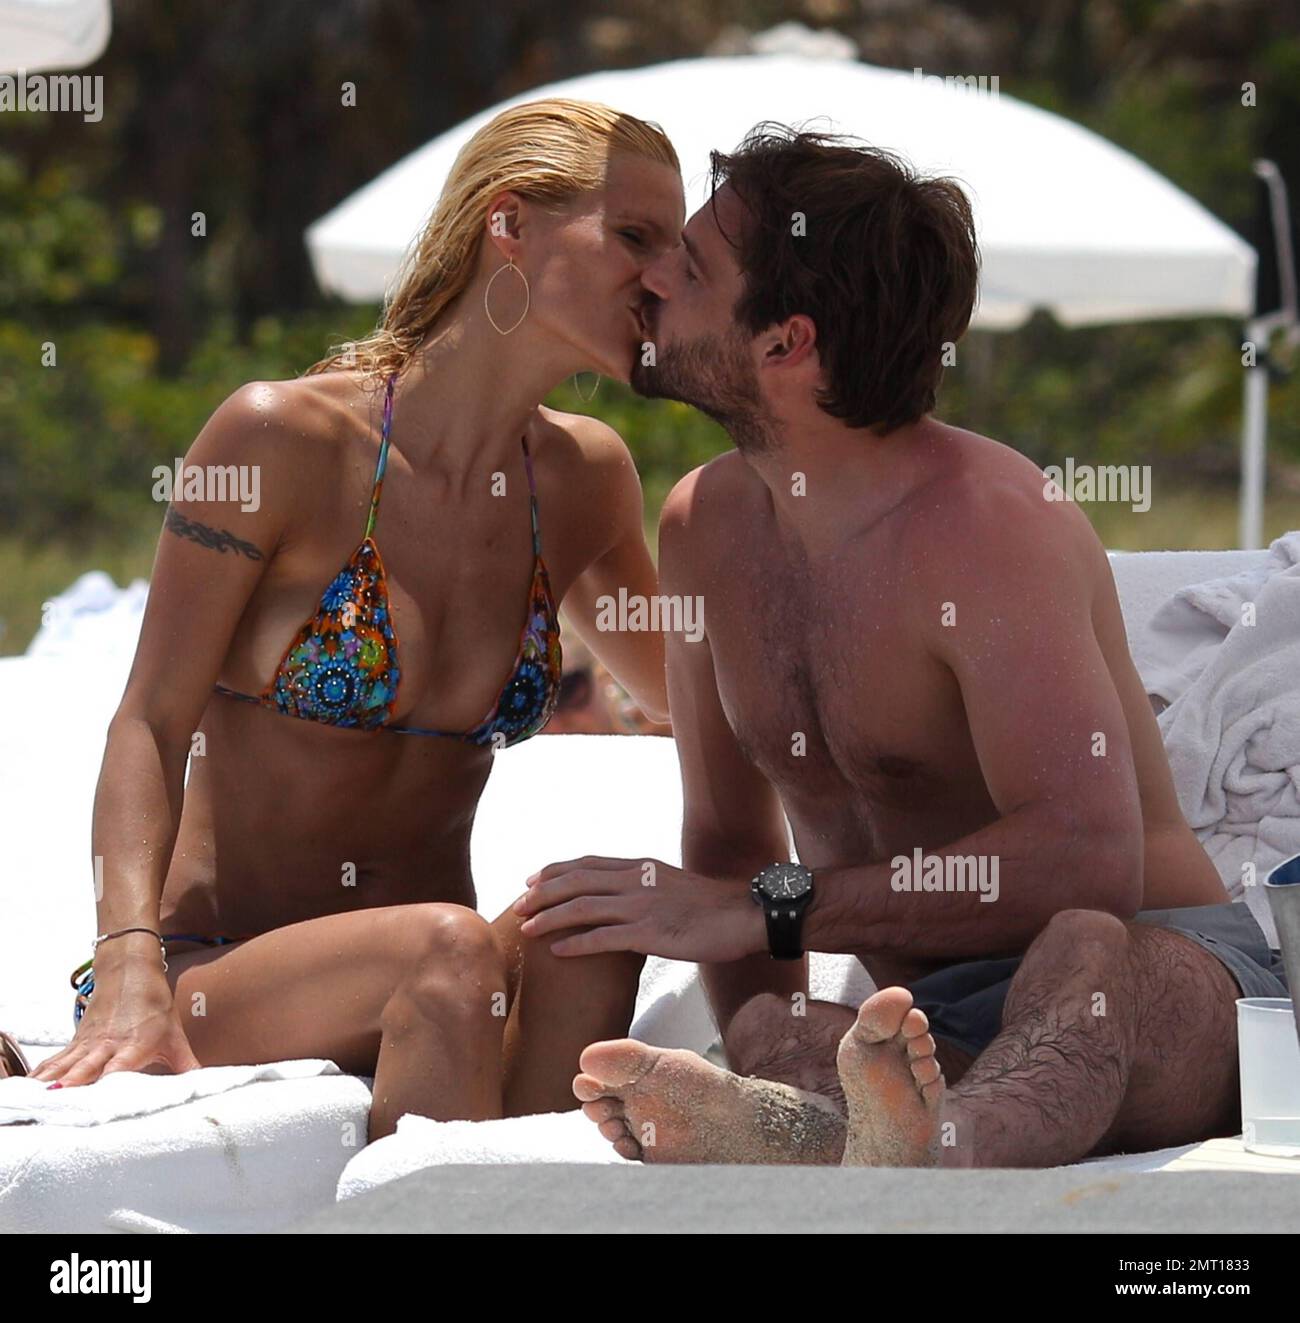 Swiss TV host and actress Michelle Hunziker spends the day in Miami Beach with boyfriend Tomaso Trussardi. 35 year old Hunziker wore a multi-color string bikini that showed off her amazing toned figure. The couple were seen taking a dip in the ocean and happily walking hand-in-hand. Miami Beach, FL. 3rd June 2012. . Stock Photo